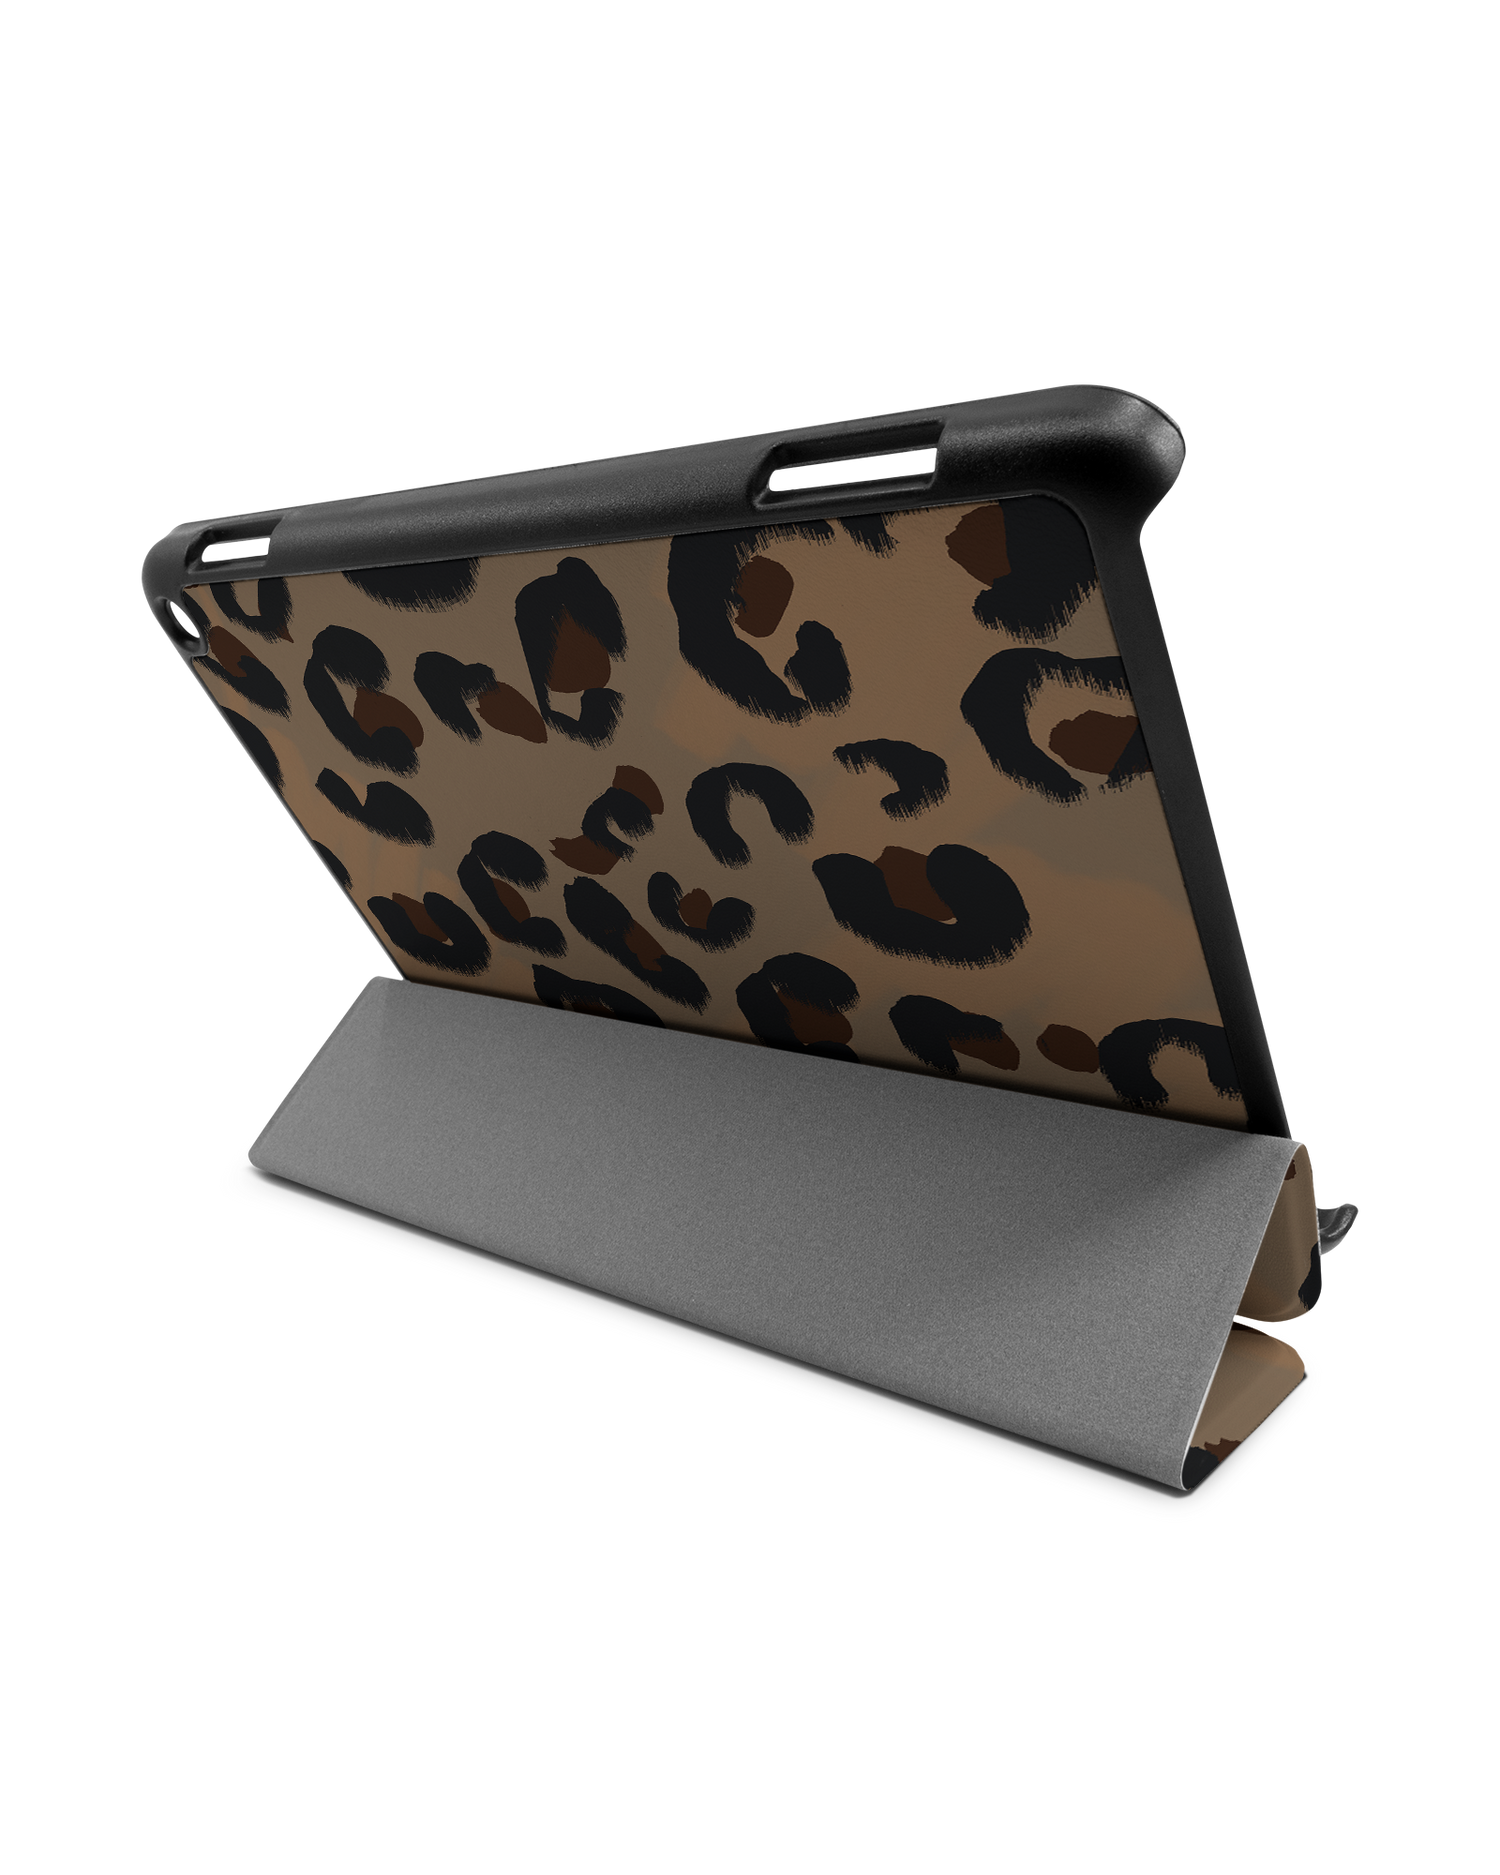 Leopard Repeat Tablet Smart Case for Amazon Fire HD 8 (2022), Amazon Fire HD 8 Plus (2022), Amazon Fire HD 8 (2020), Amazon Fire HD 8 Plus (2020): Used as Stand